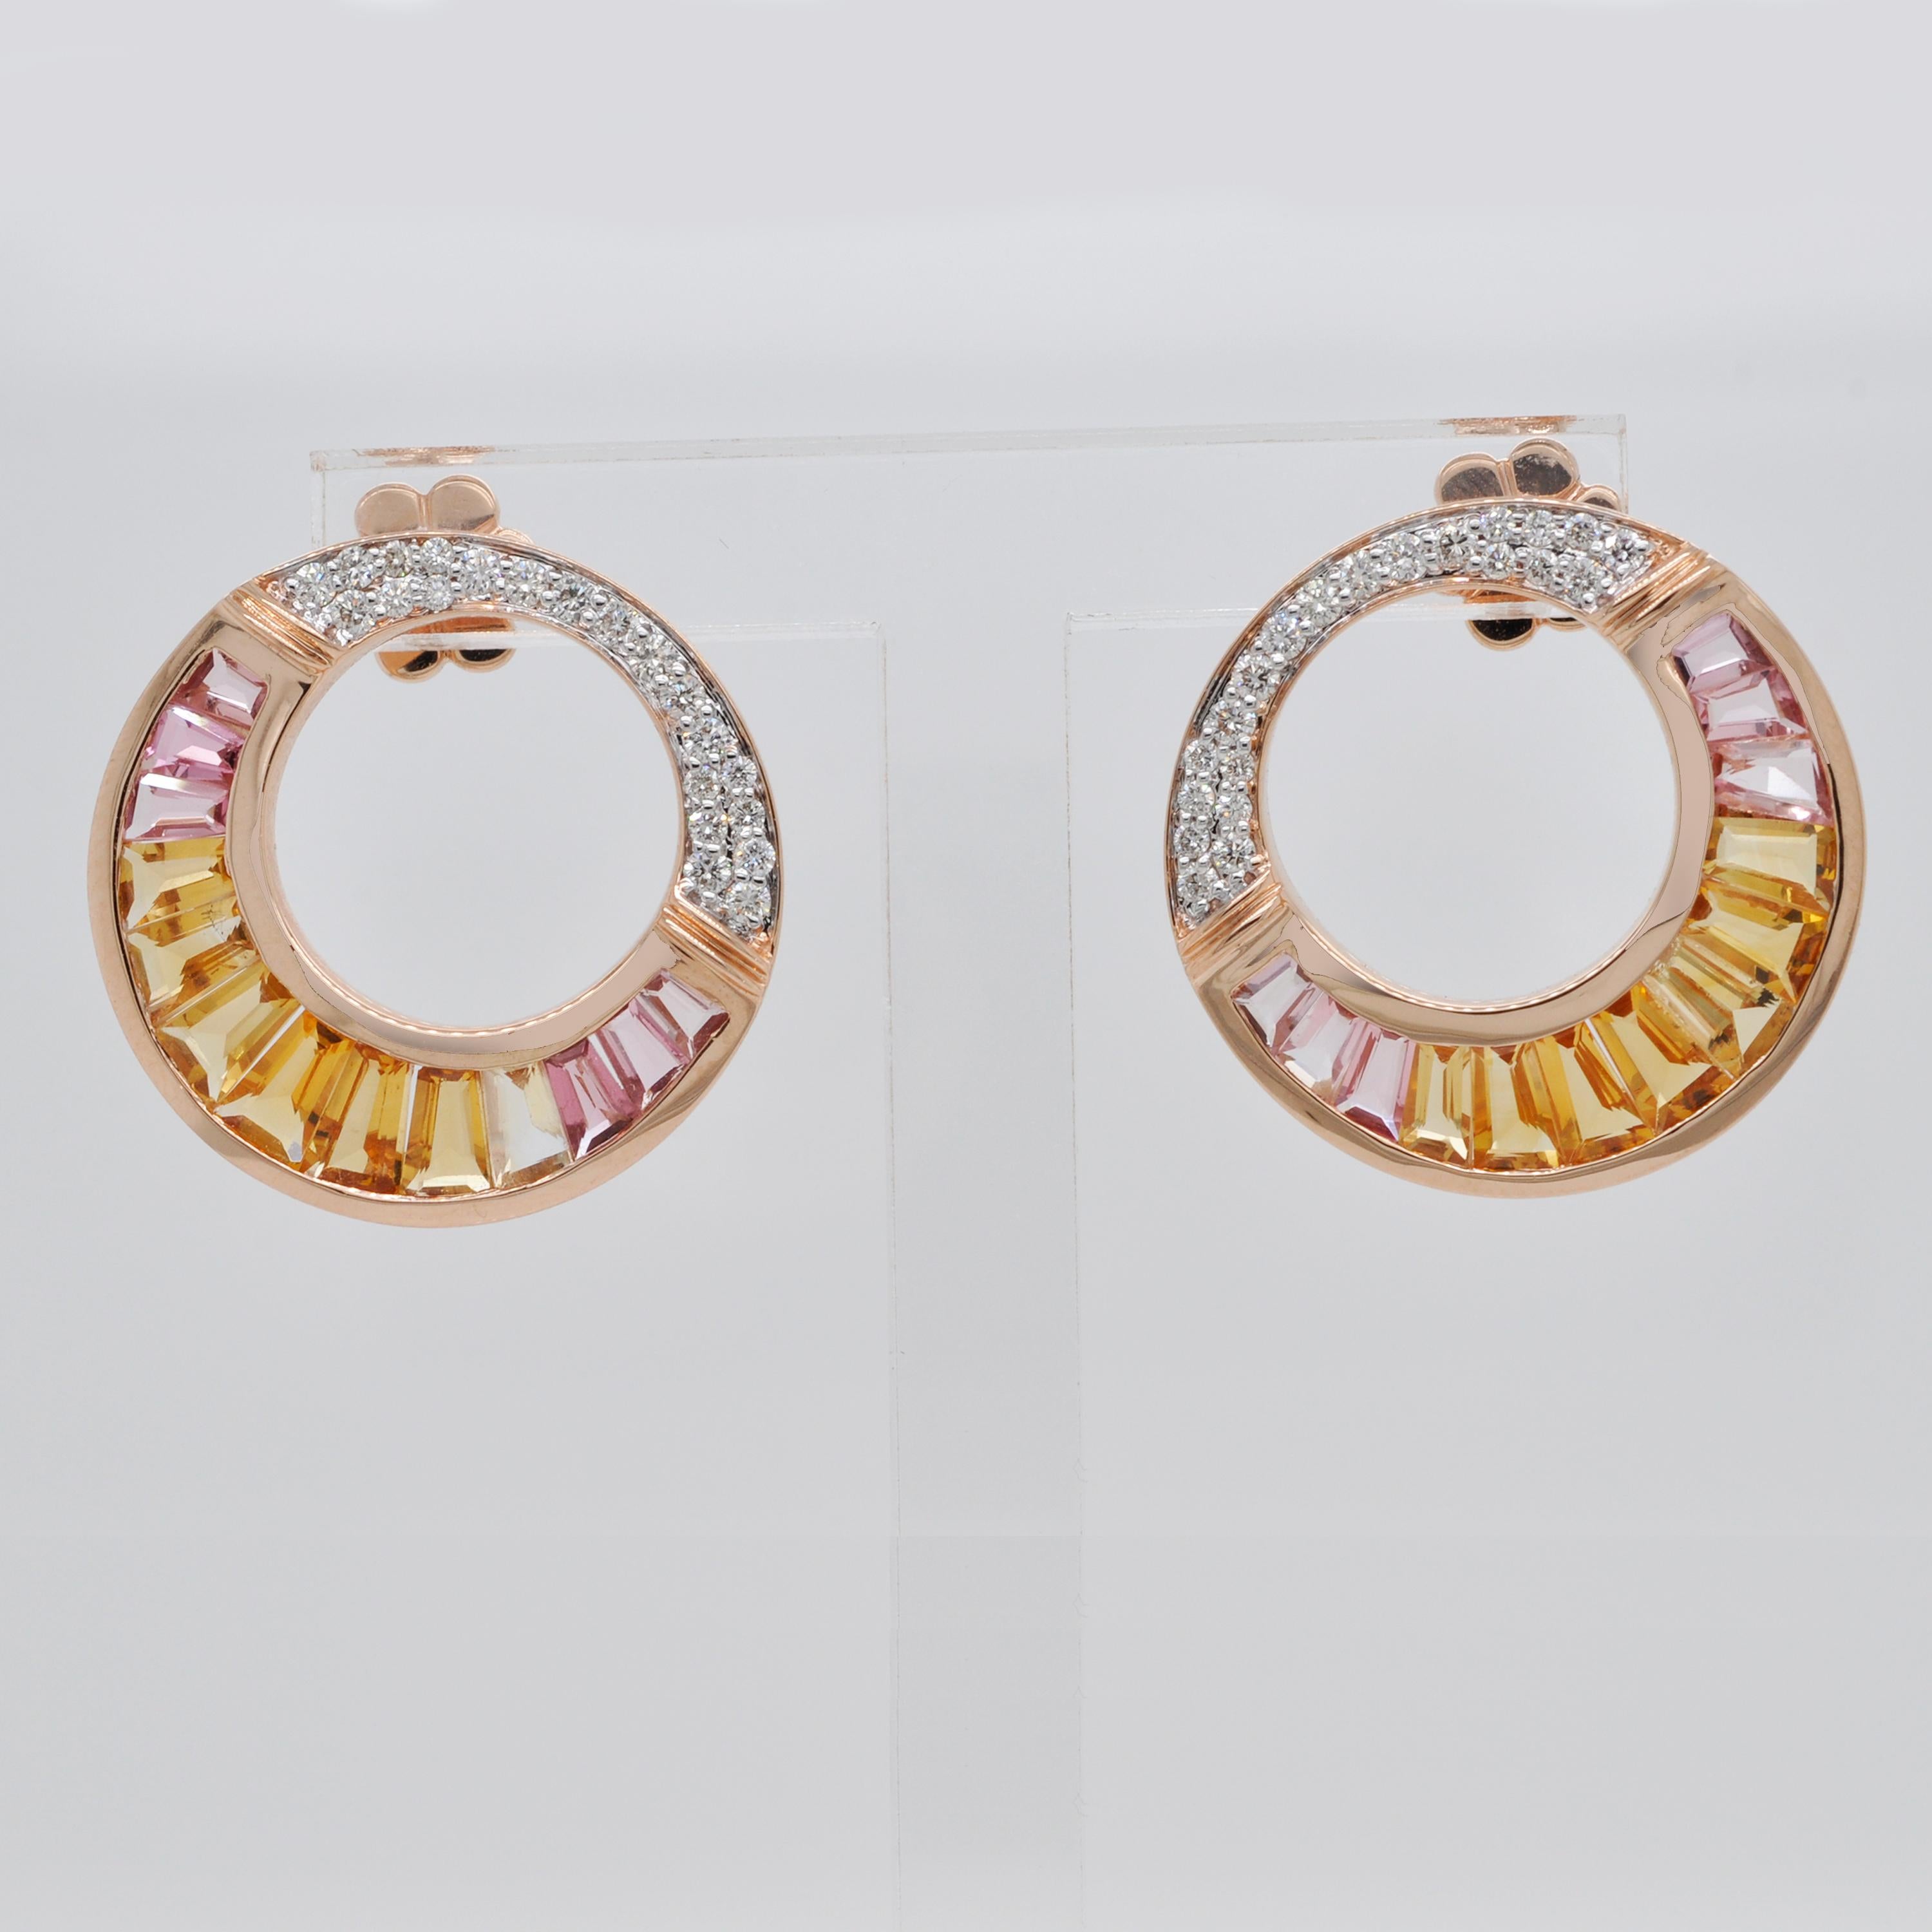 18 Karat Rose Gold Citrine Peach Tourmaline Diamond Pendant Necklace Earring Set In New Condition For Sale In Jaipur, Rajasthan